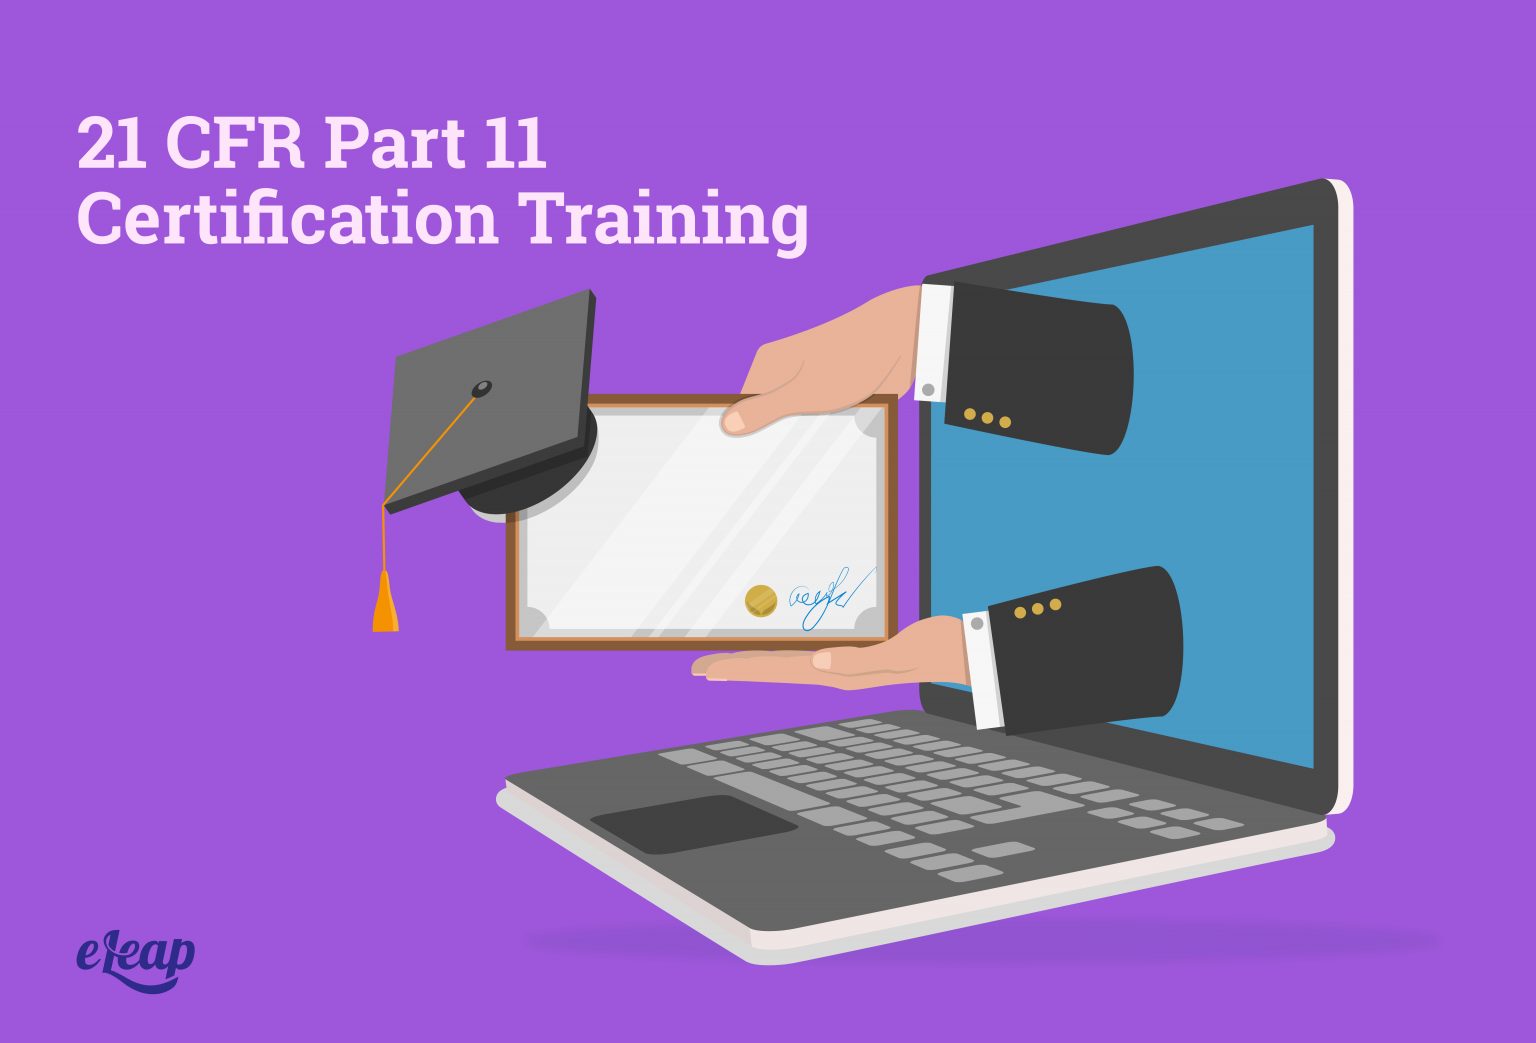 The Components of a 21 CFR Part 11 Certification Training Course